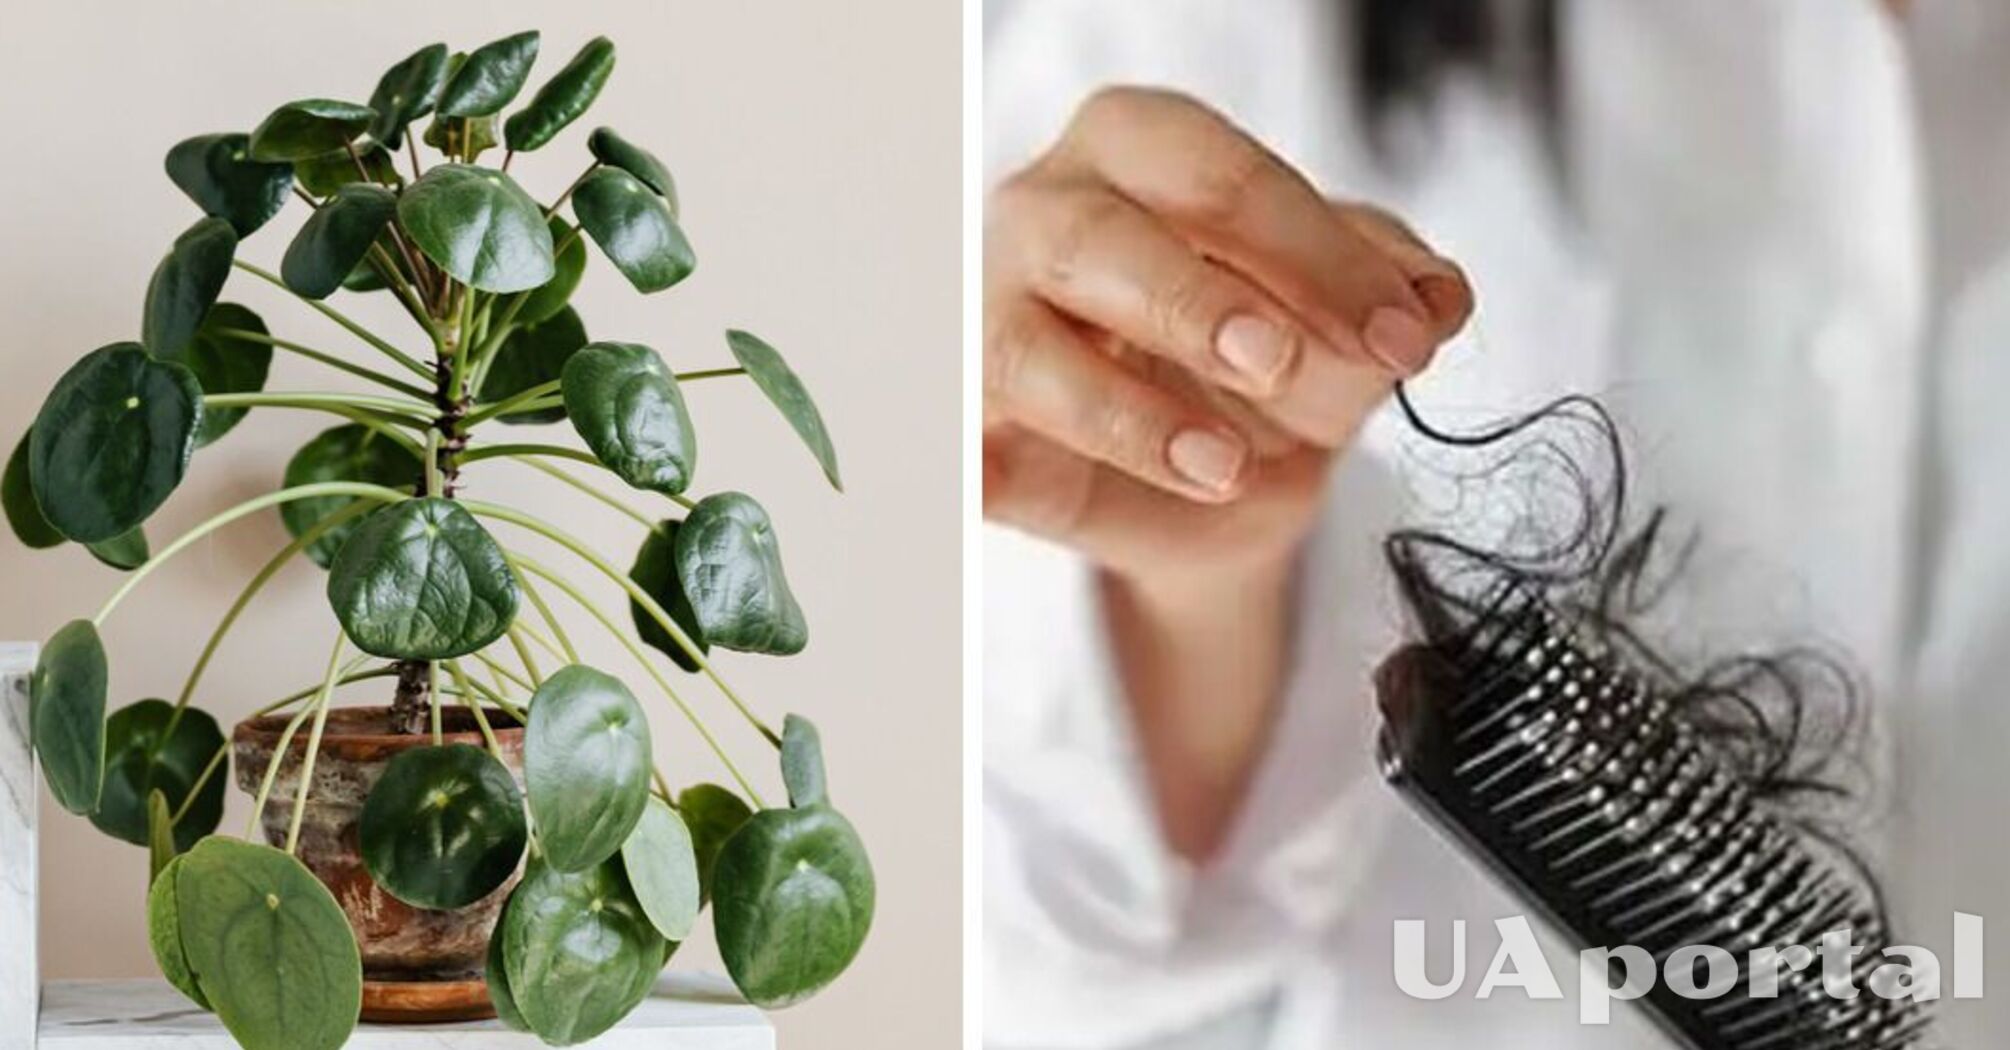 Free fertilizer for nourishing indoor plants: collect hair and pet fur